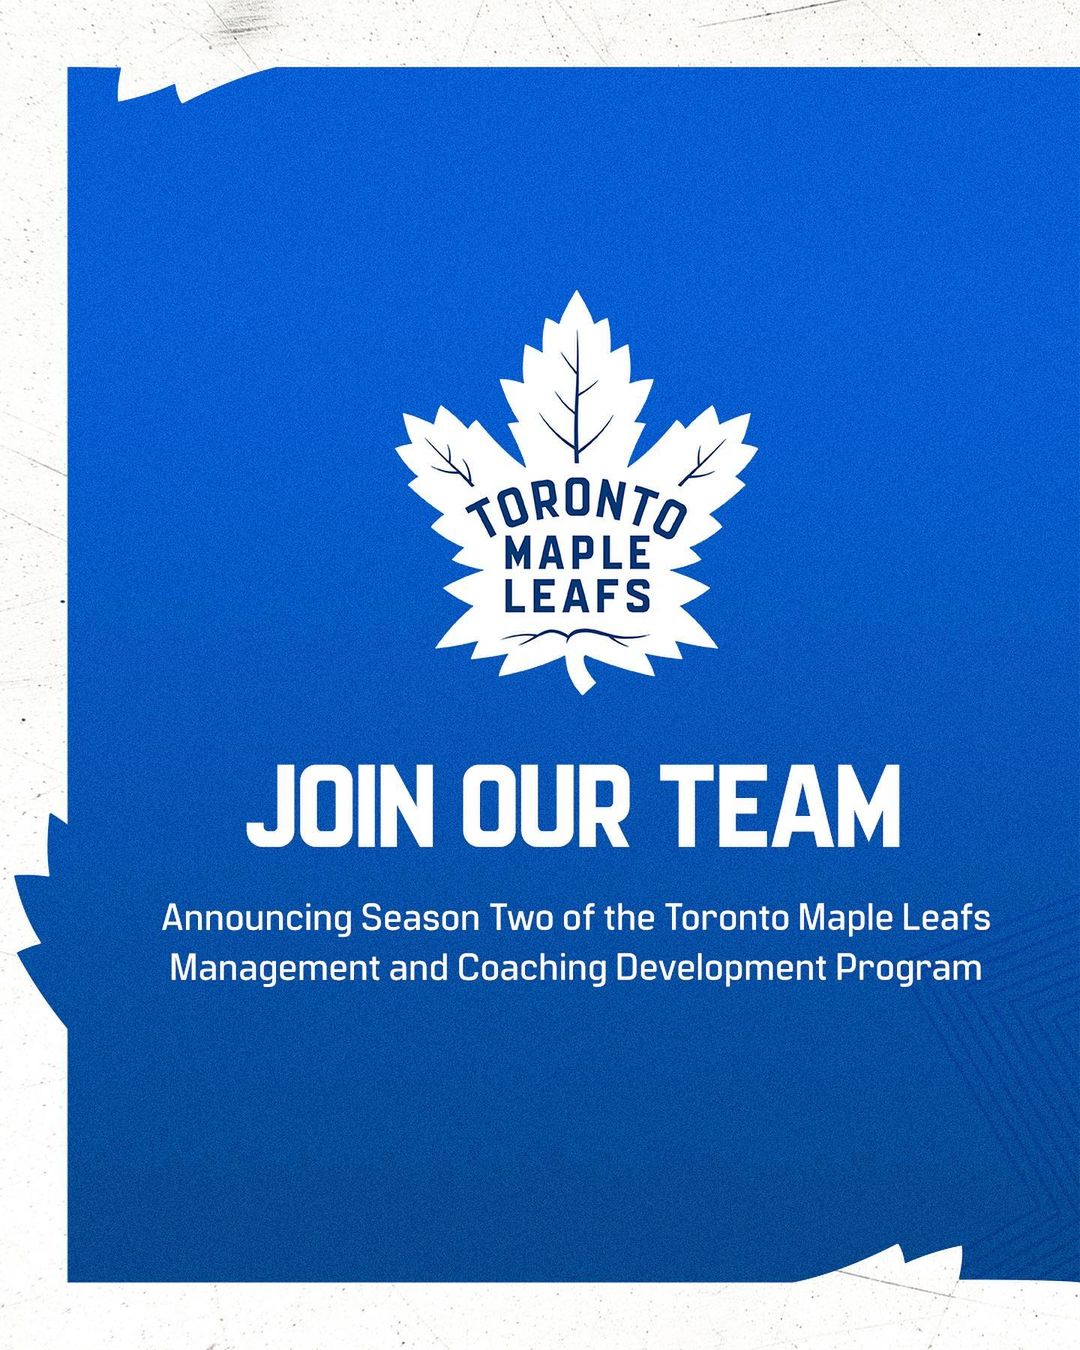 Our Management and Coaching Development Program is back for the 2022-23 season 
...